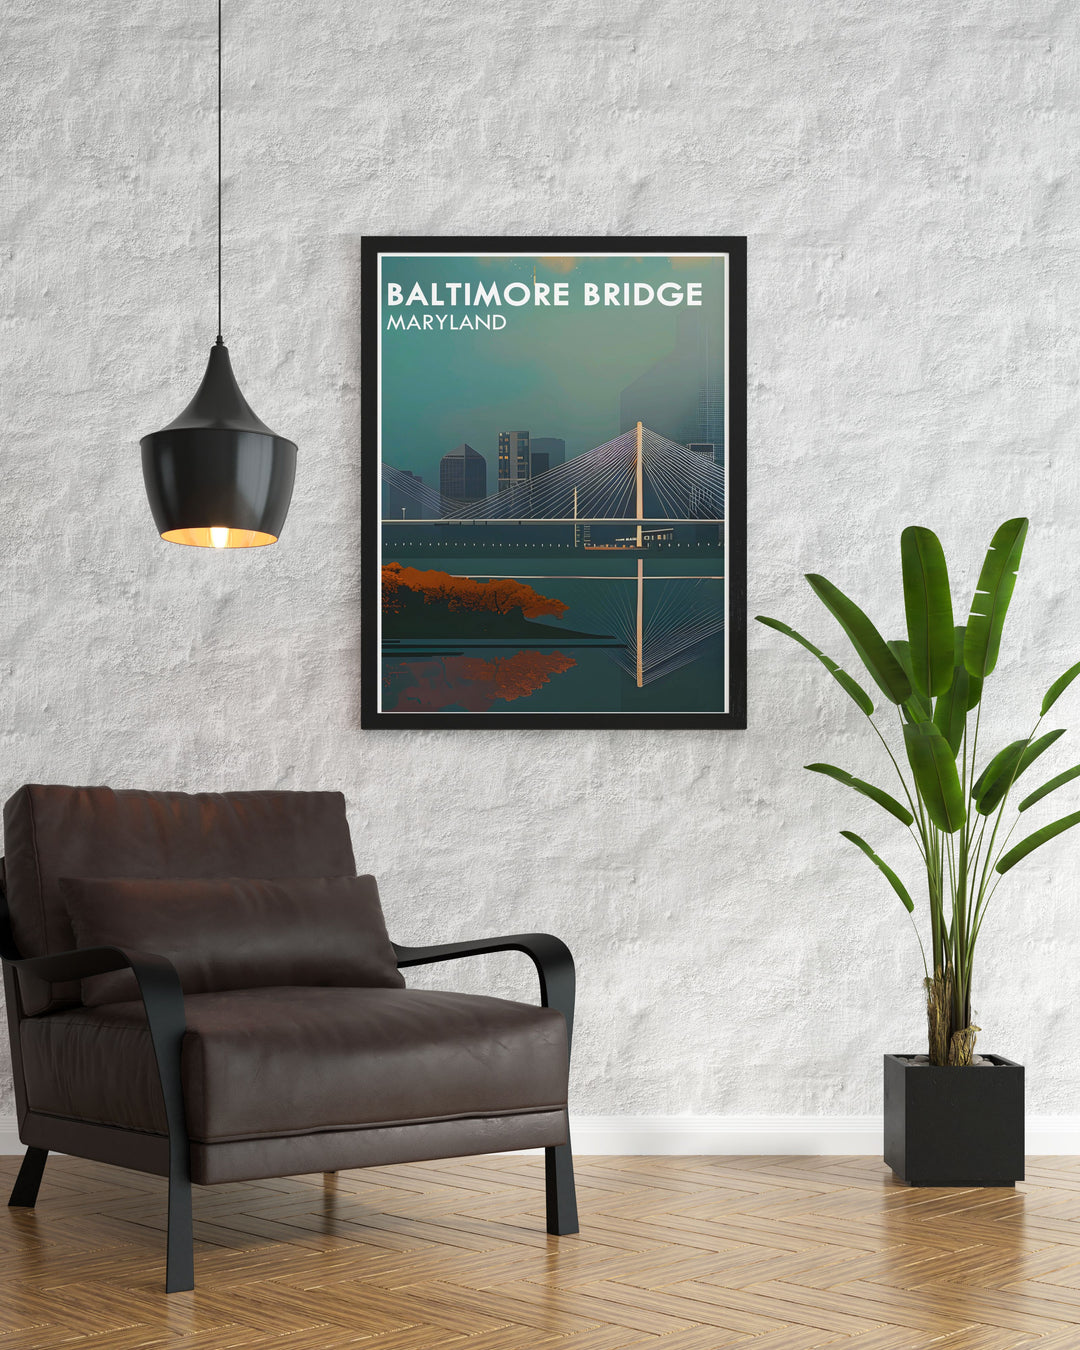 Captivating Baltimore art print featuring the Key Bridge new design. The artwork captures the beauty of the bridge and the surrounding cityscape, making it a unique addition to Maryland artwork collections and home decor.